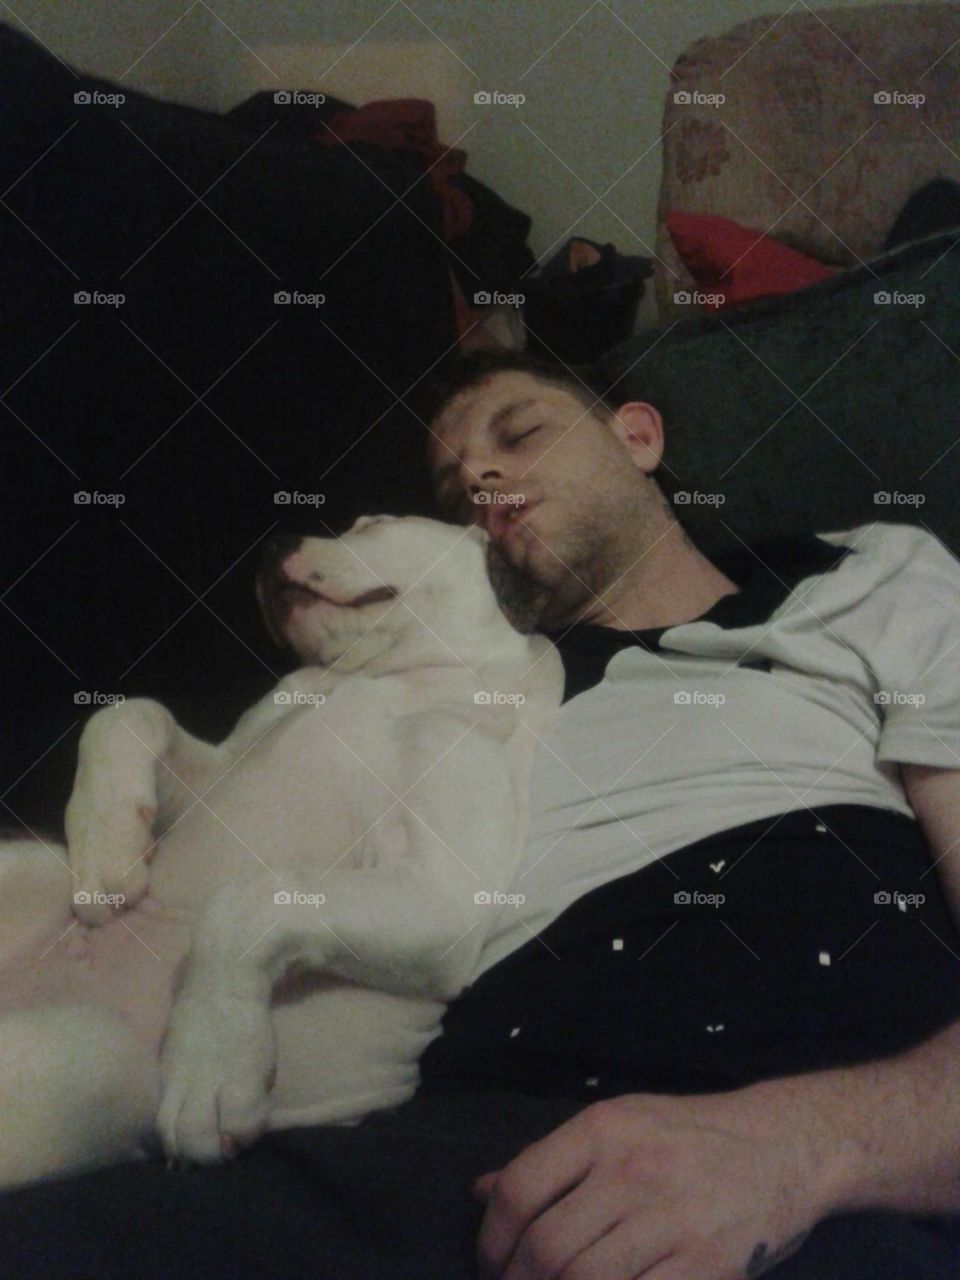 Man and dog sleeping together. Cuteness is not the word.